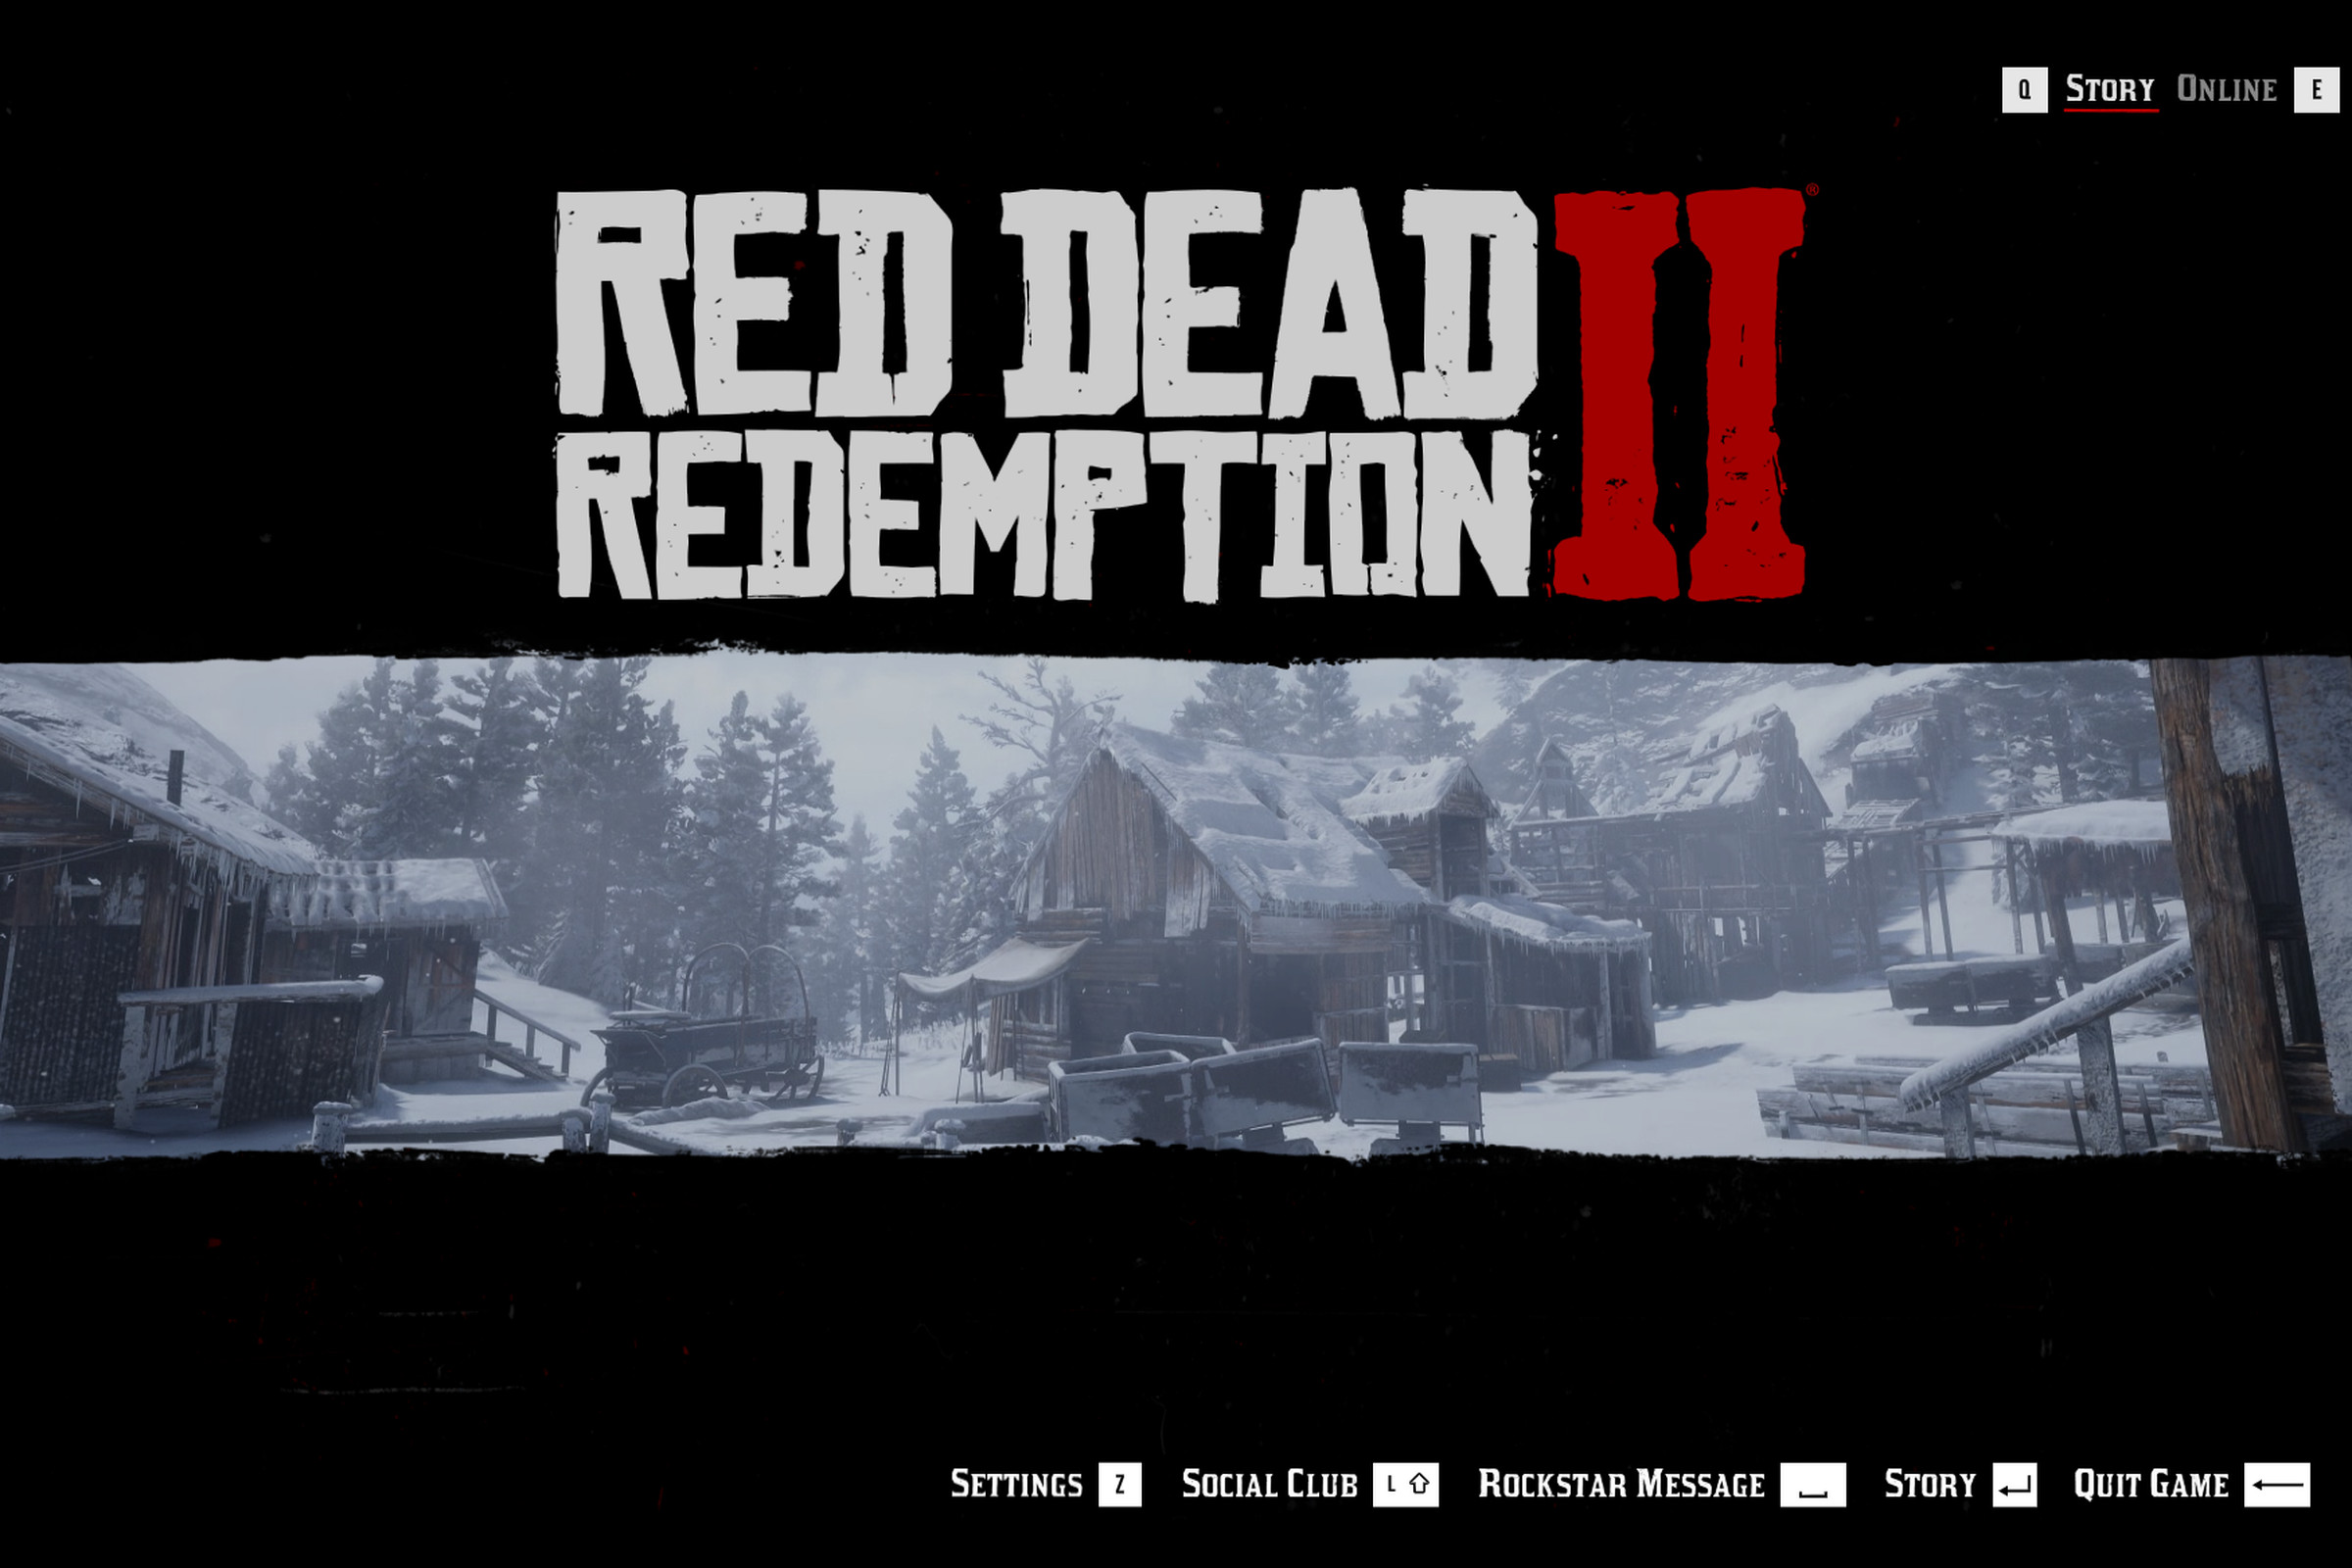 Screenshot of the Red Dead Redemption 2 home screen.